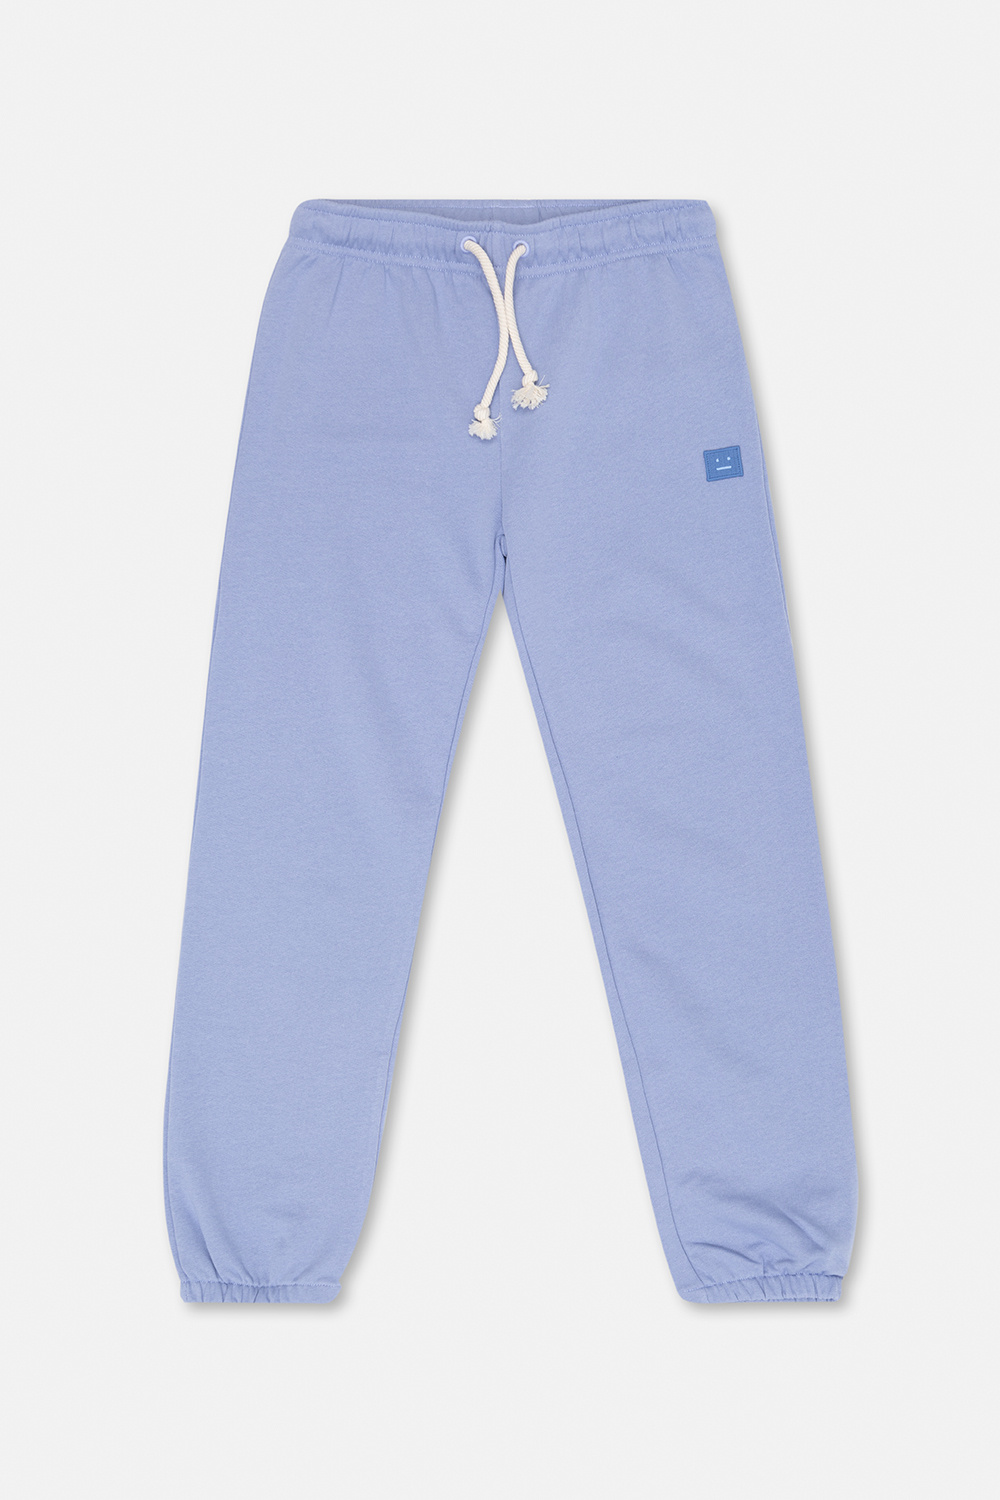 Acne Studios Kids bear-embroidered track pants